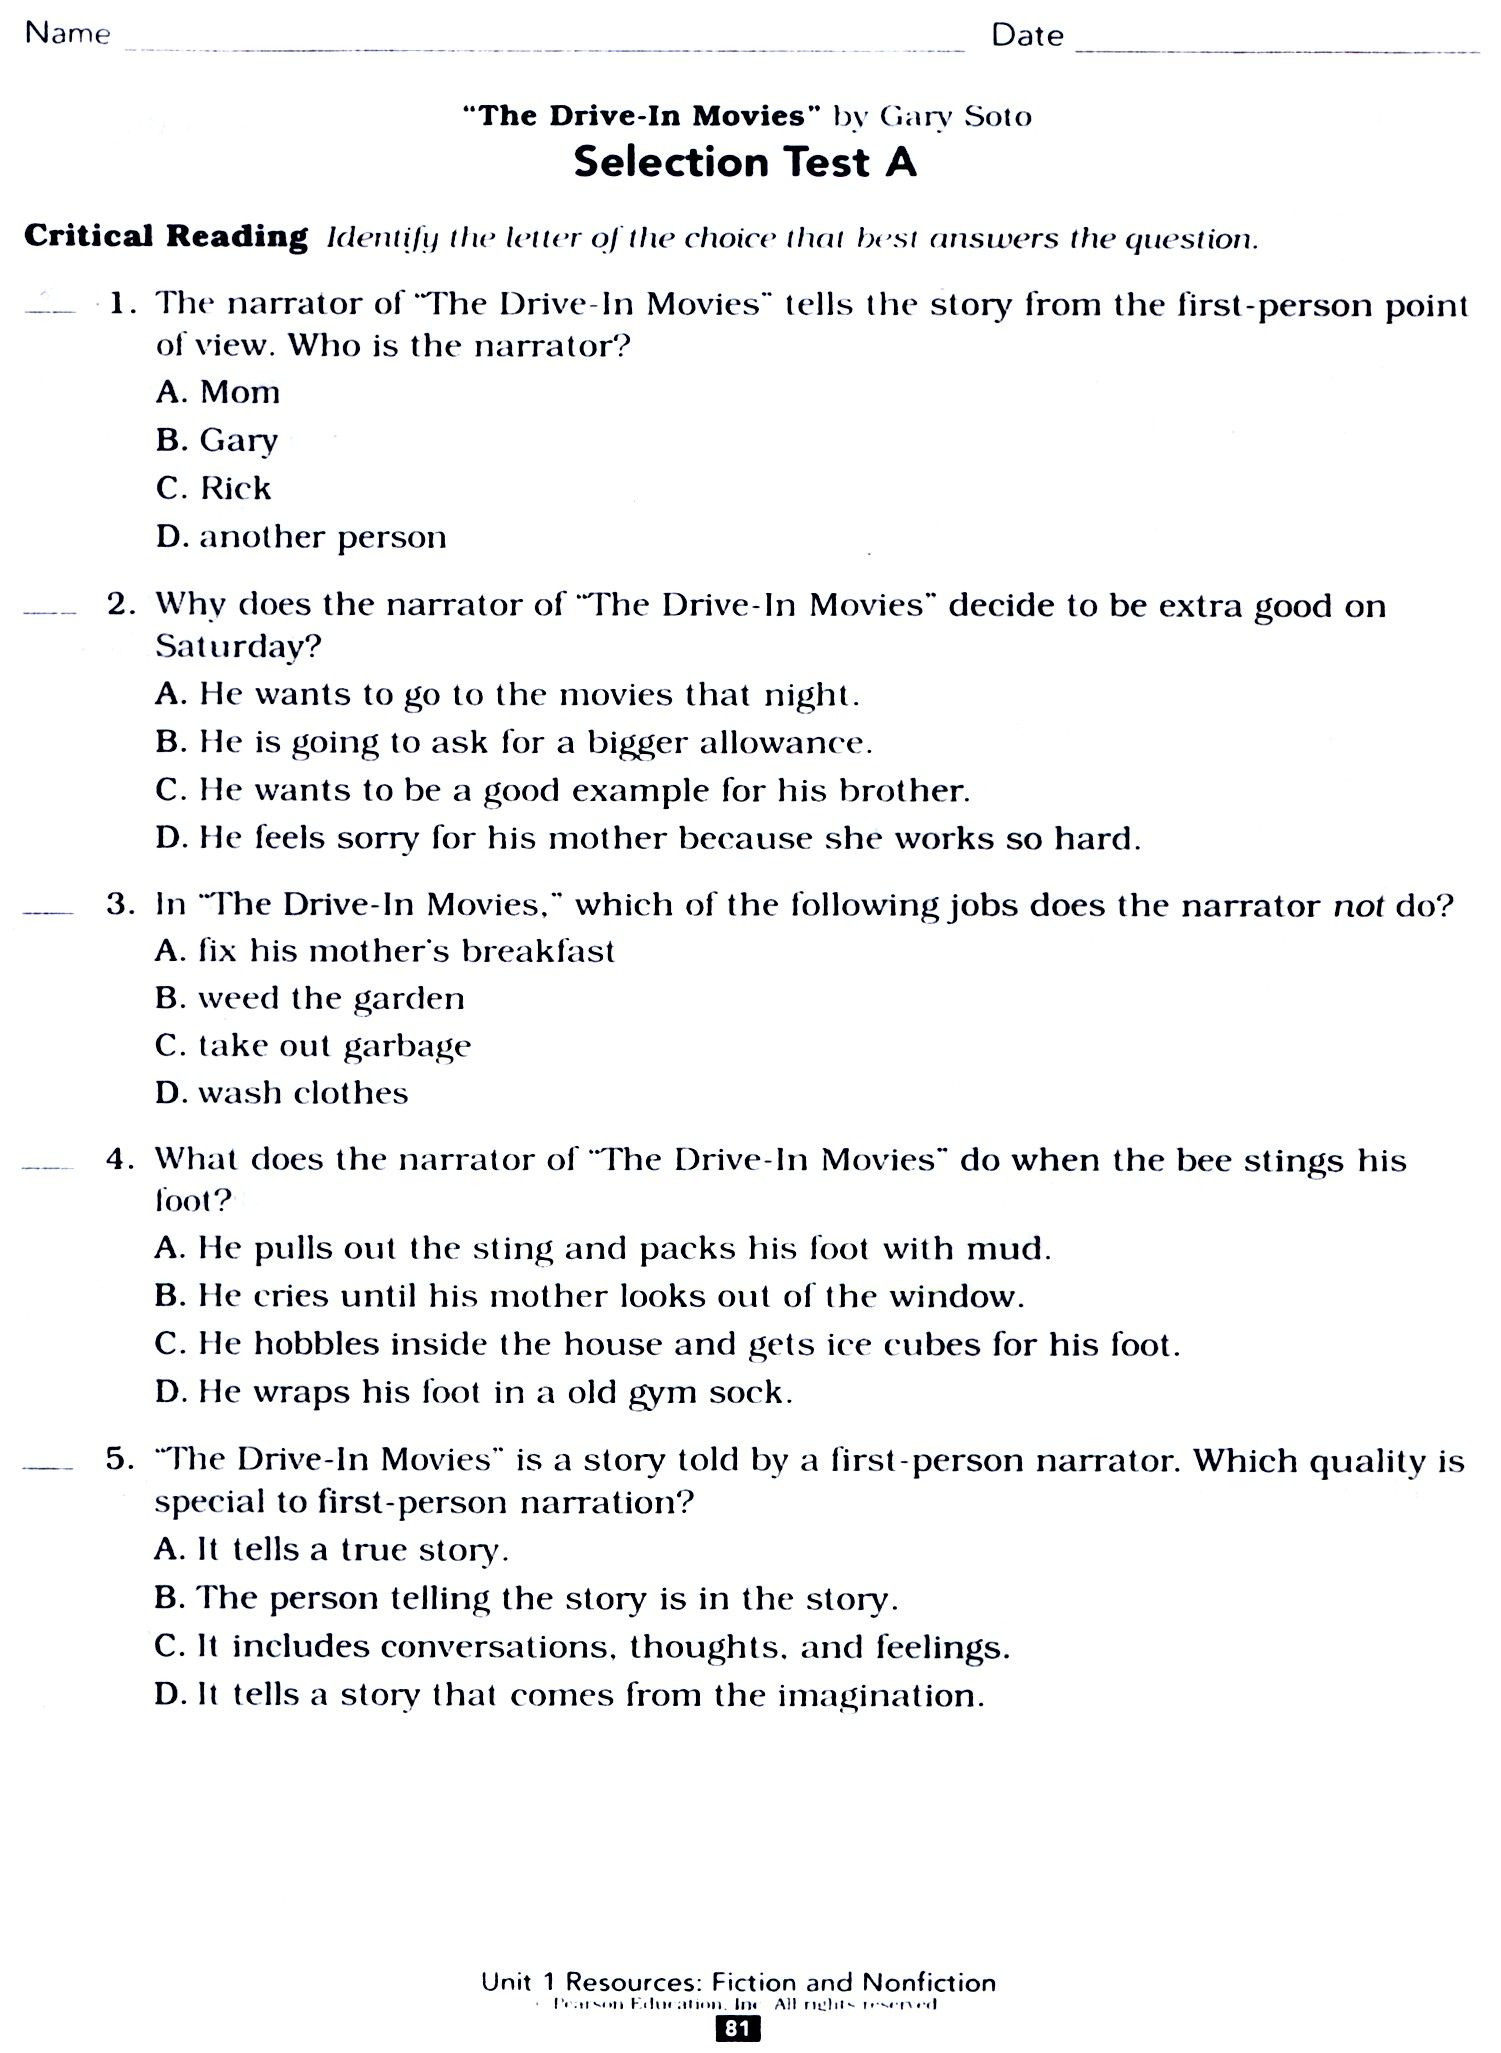 6Th Grade Social Studies Worksheets With Answer Key | db-excel.com